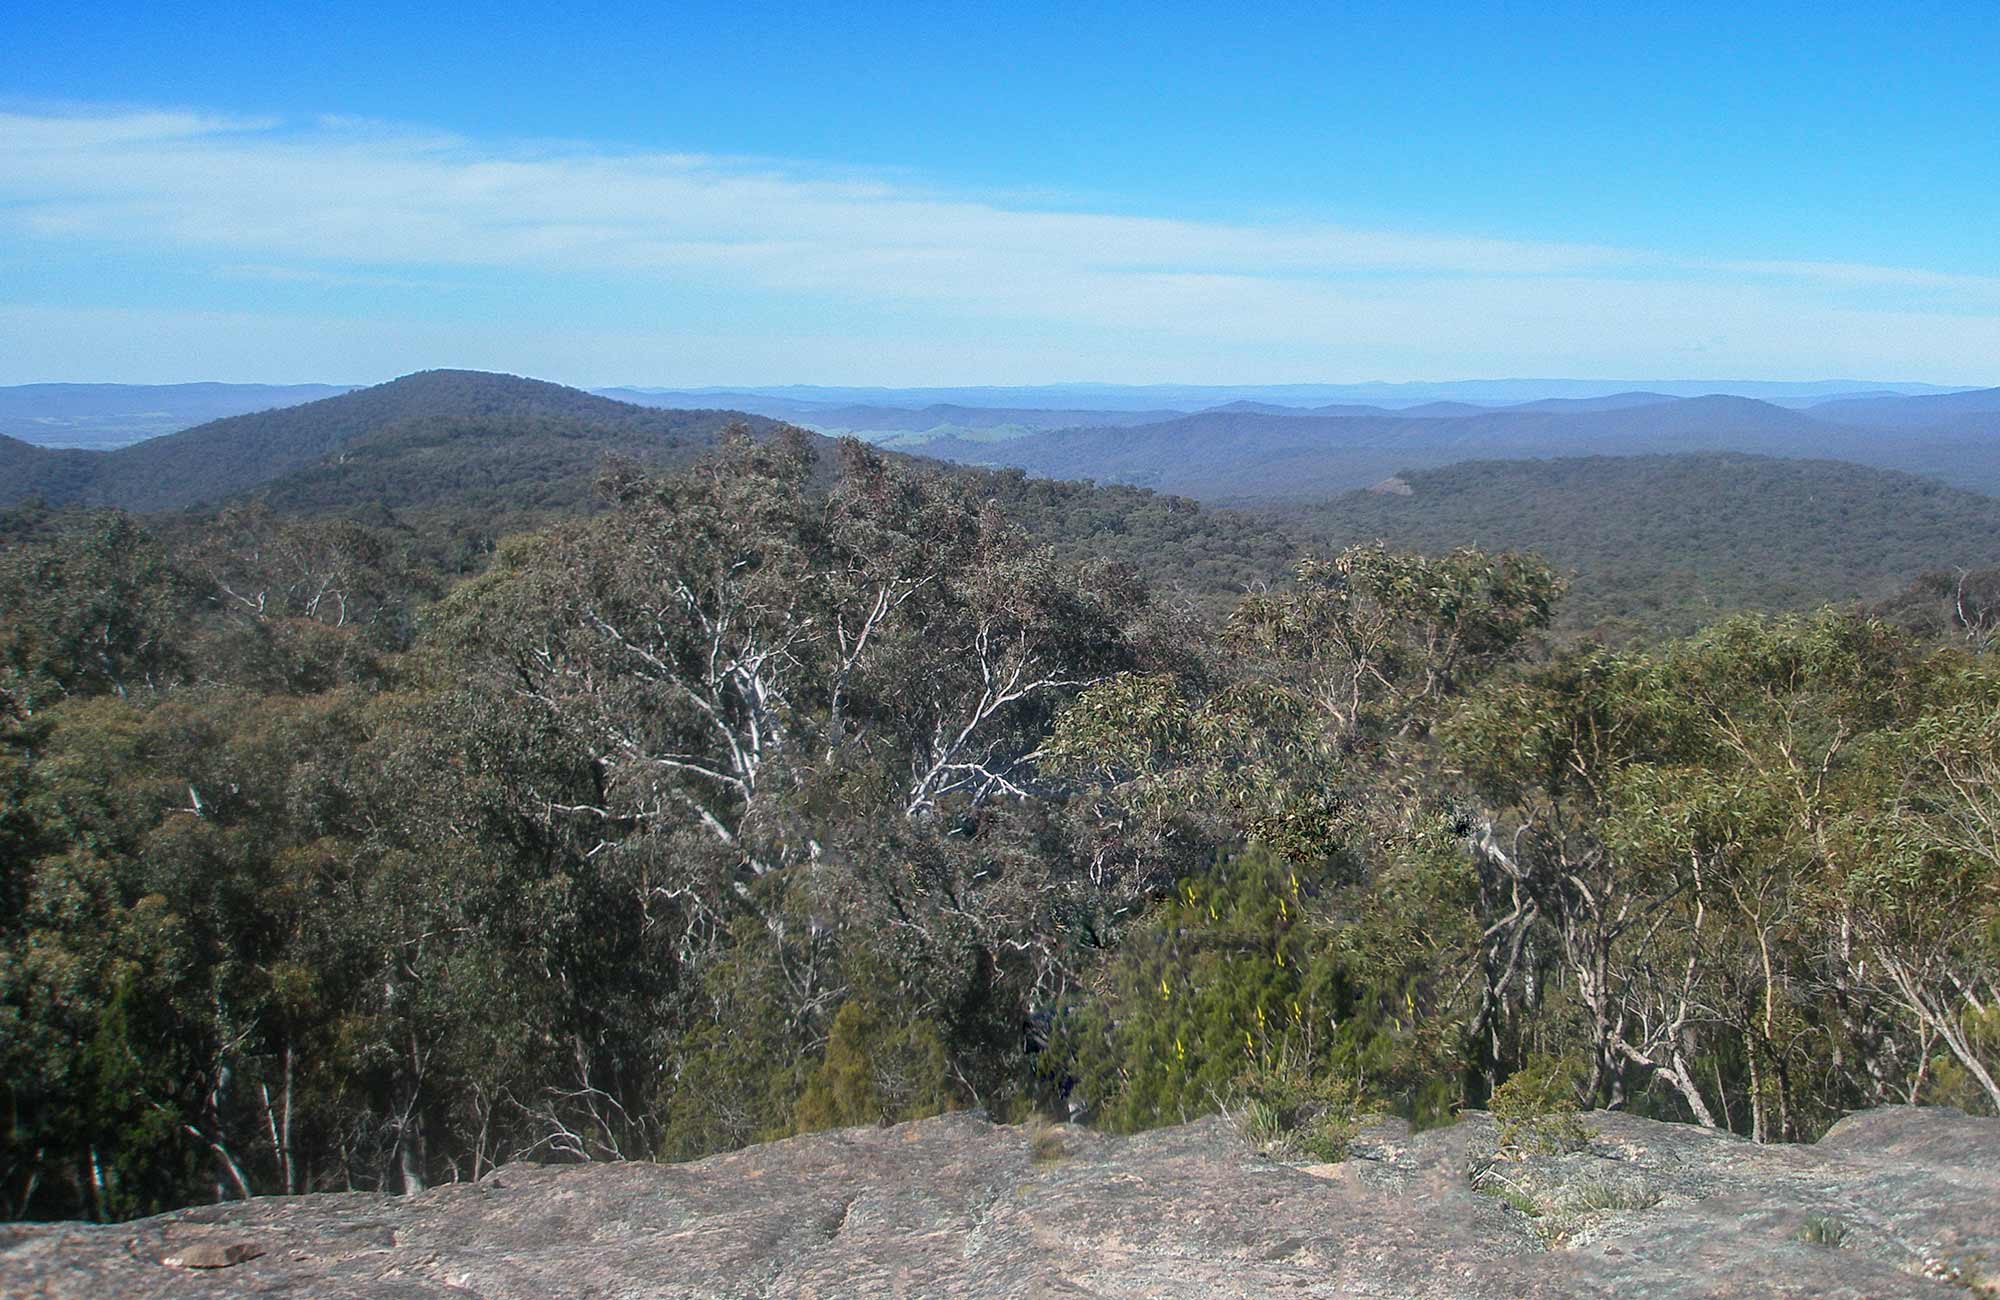 Norths lookout, Woomargama National Park. Photo: Dave Pearce/NSW Government